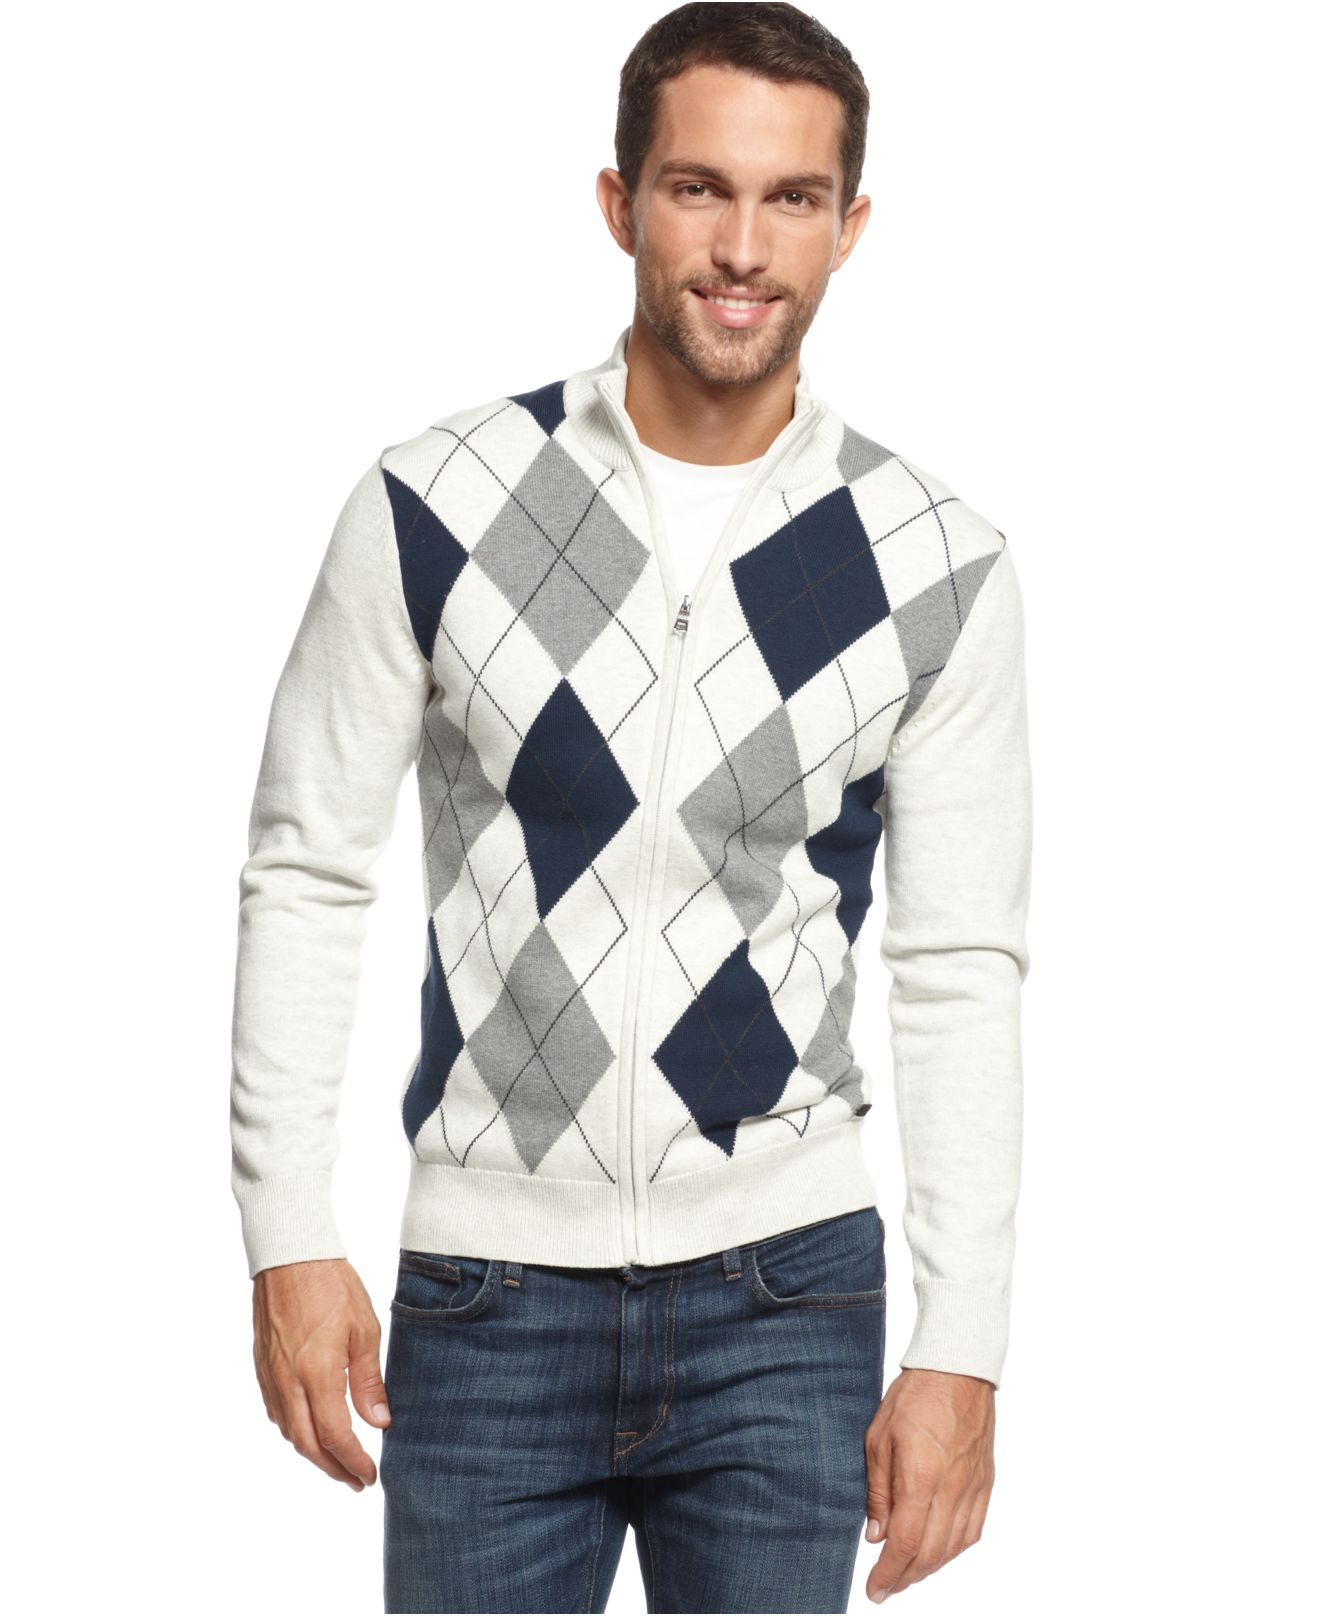 Lyst - Inc international concepts Andie Argyle Full-Zip Sweater in Gray ...